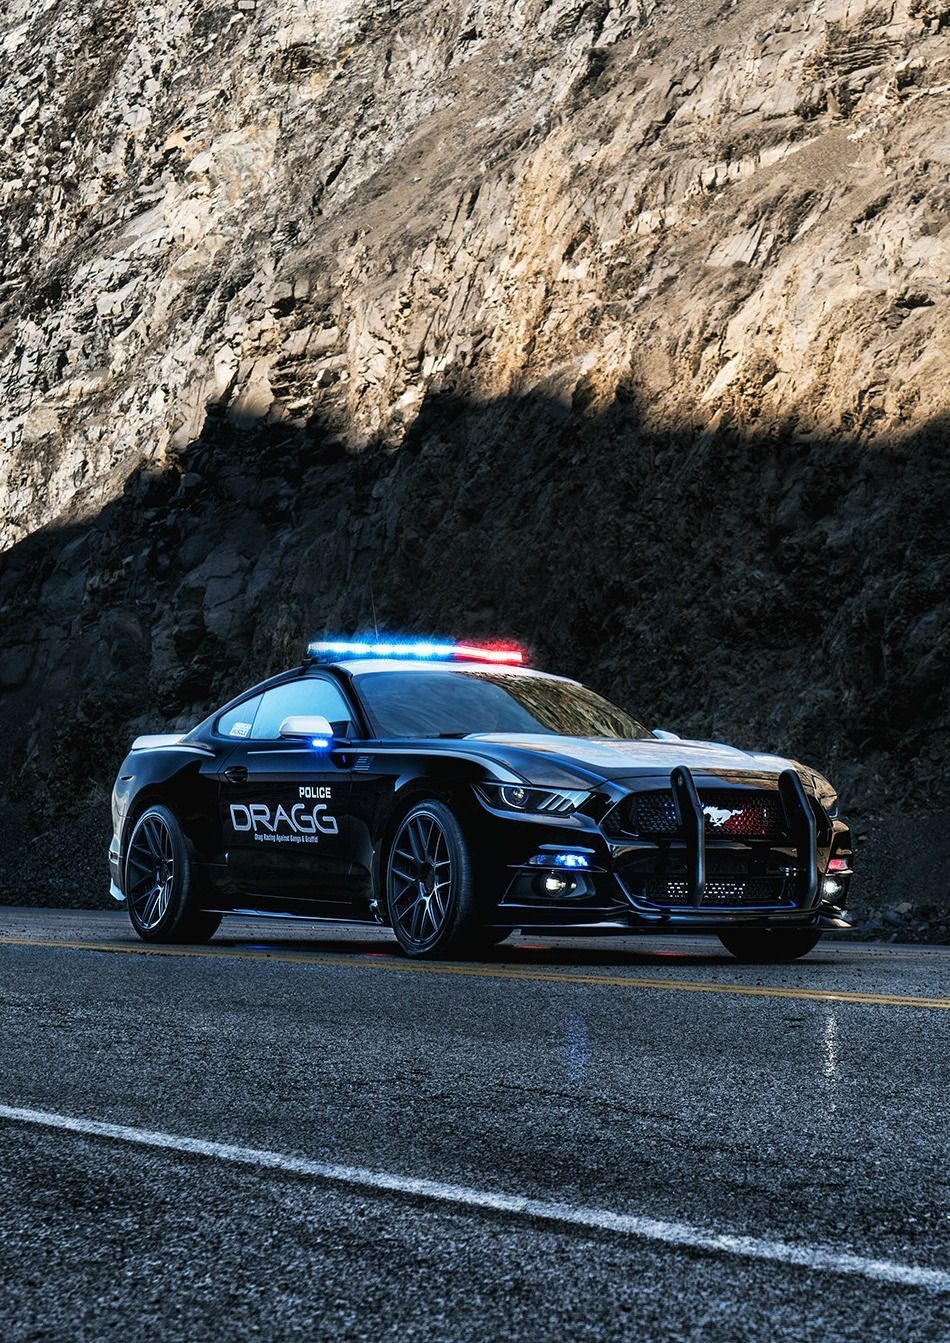 Ford Mustang Police. Mustang, Police cars, Muscle cars mustang